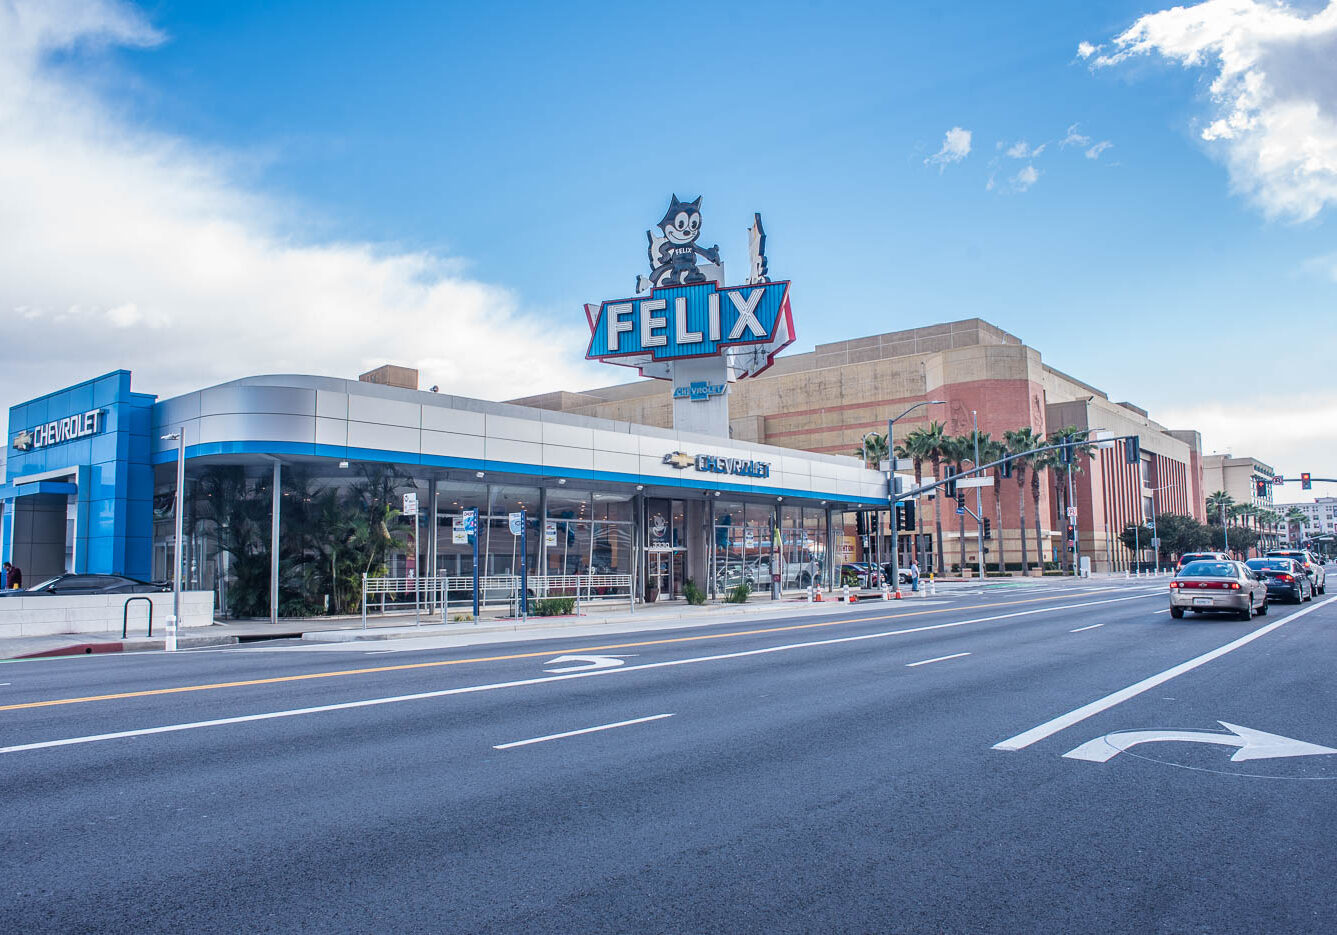 Felix Chevrolet
Los Angeles, CA 90007
18.02.2019 15:25 PST
24mm 1/160 sec f/9.0 ISO 180

https://www.felixchevrolet.com/felix-chevrolet-the-story-behind-the-iconic-dealership/